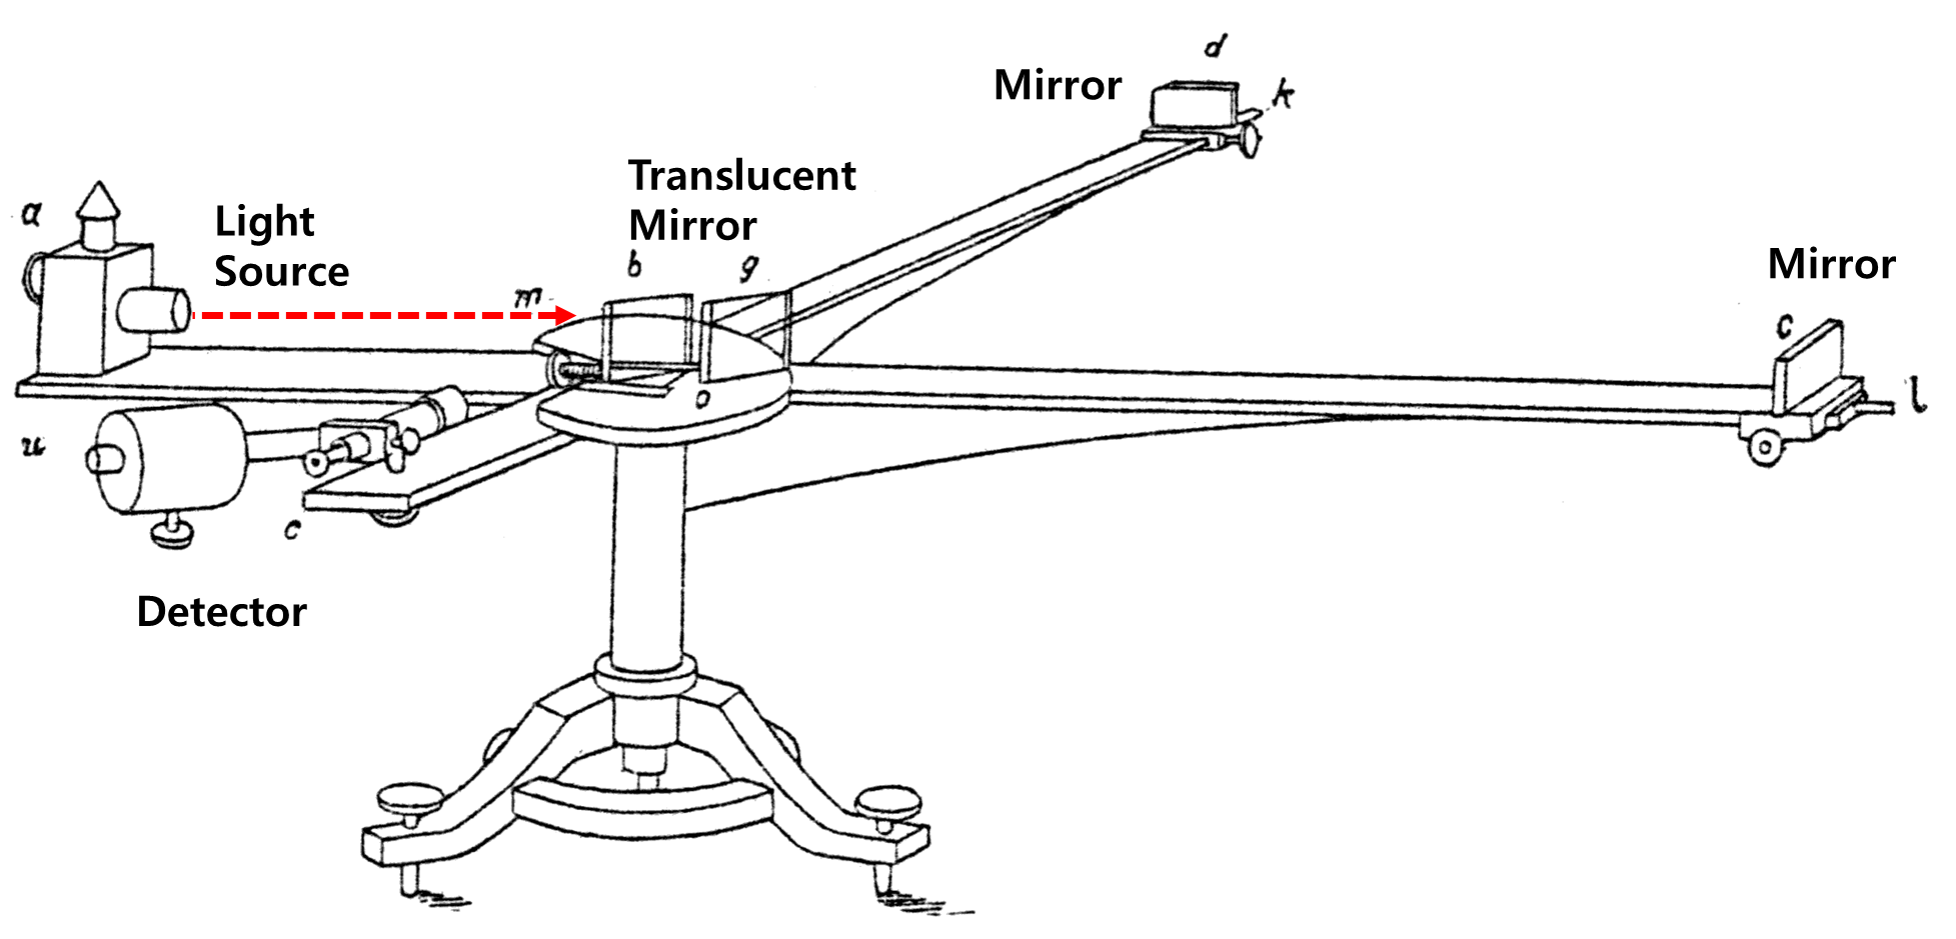 Figure 4. Schematic of the interferometer developed by Michelson in 1881 (modified from the image of wikipedia.org).